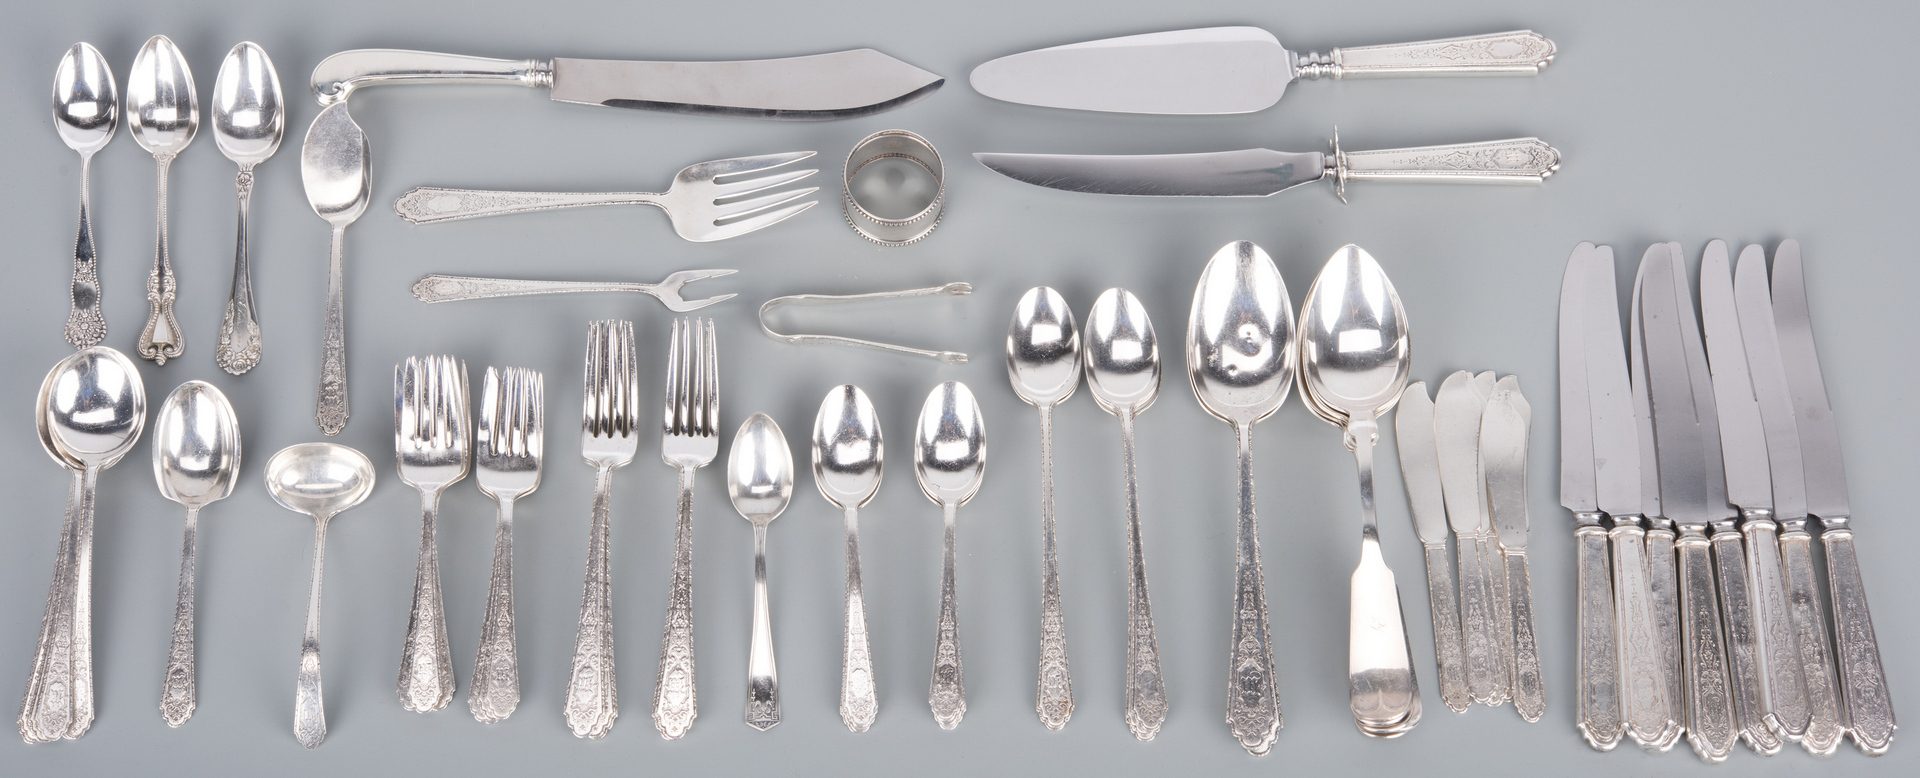 Lot 755: Lunt "Mary II" Sterling Flatware, 67 pcs incl. serving